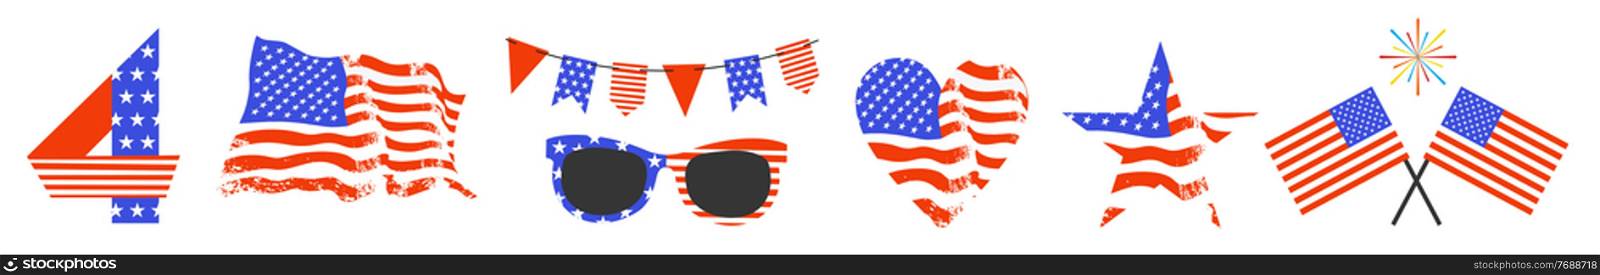 A collection of vector cliparts for creating your own festive design for Independence Day on July 4. A set of individual elements on a white background.. Happy Independence Day. A set of vector cliparts for creating your own festive design.